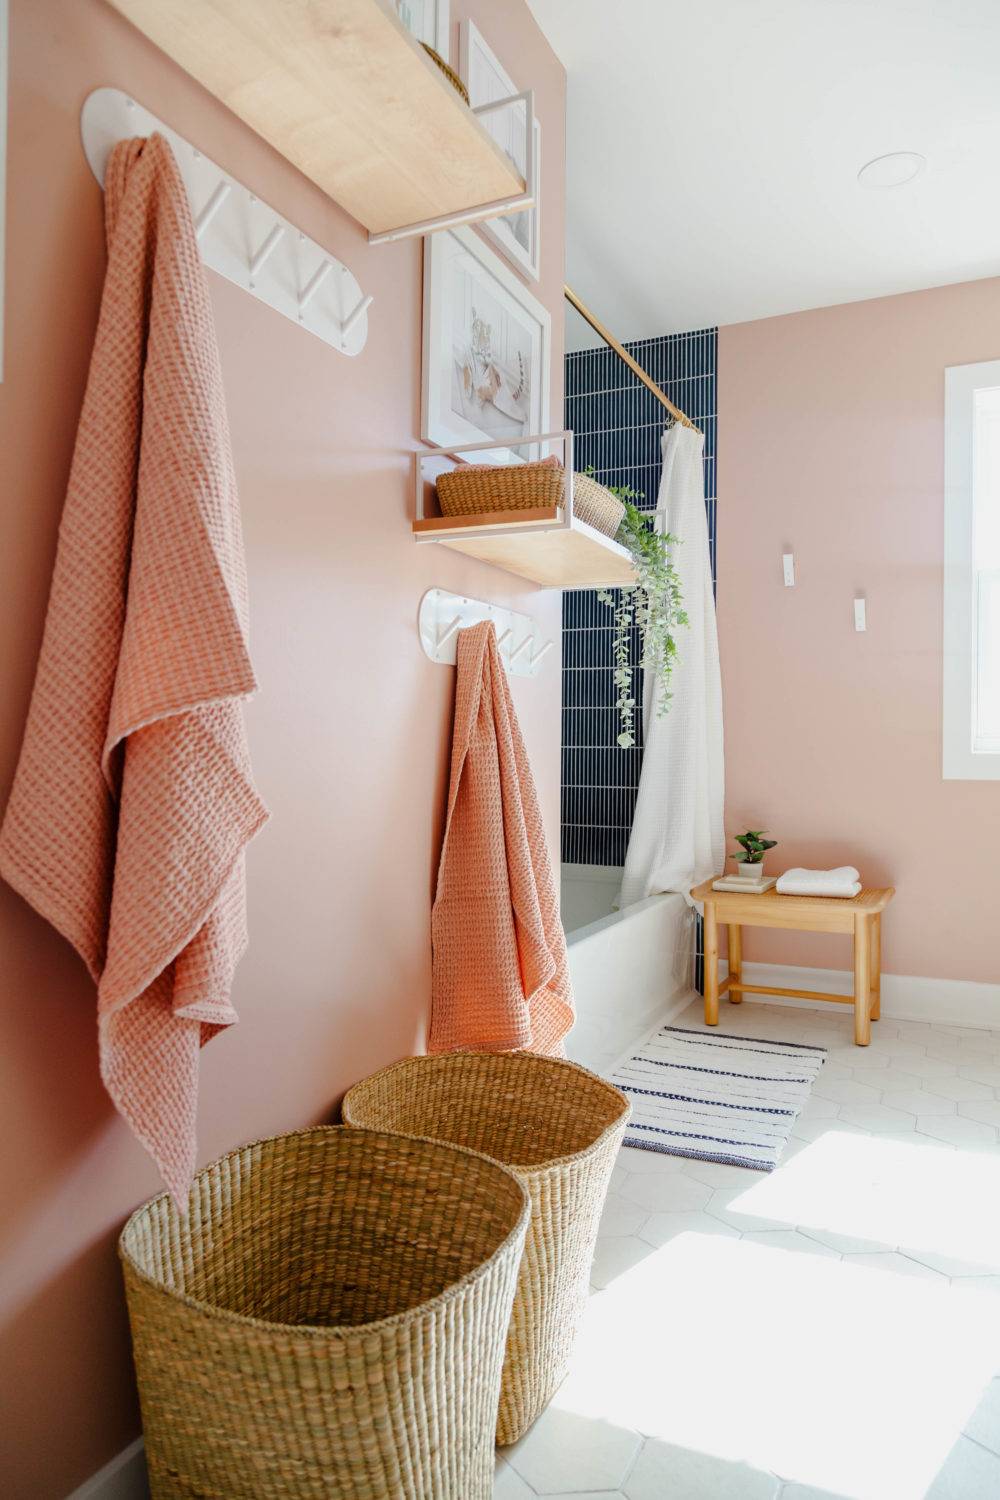 Kids bathroom with pink walls and white hex tile